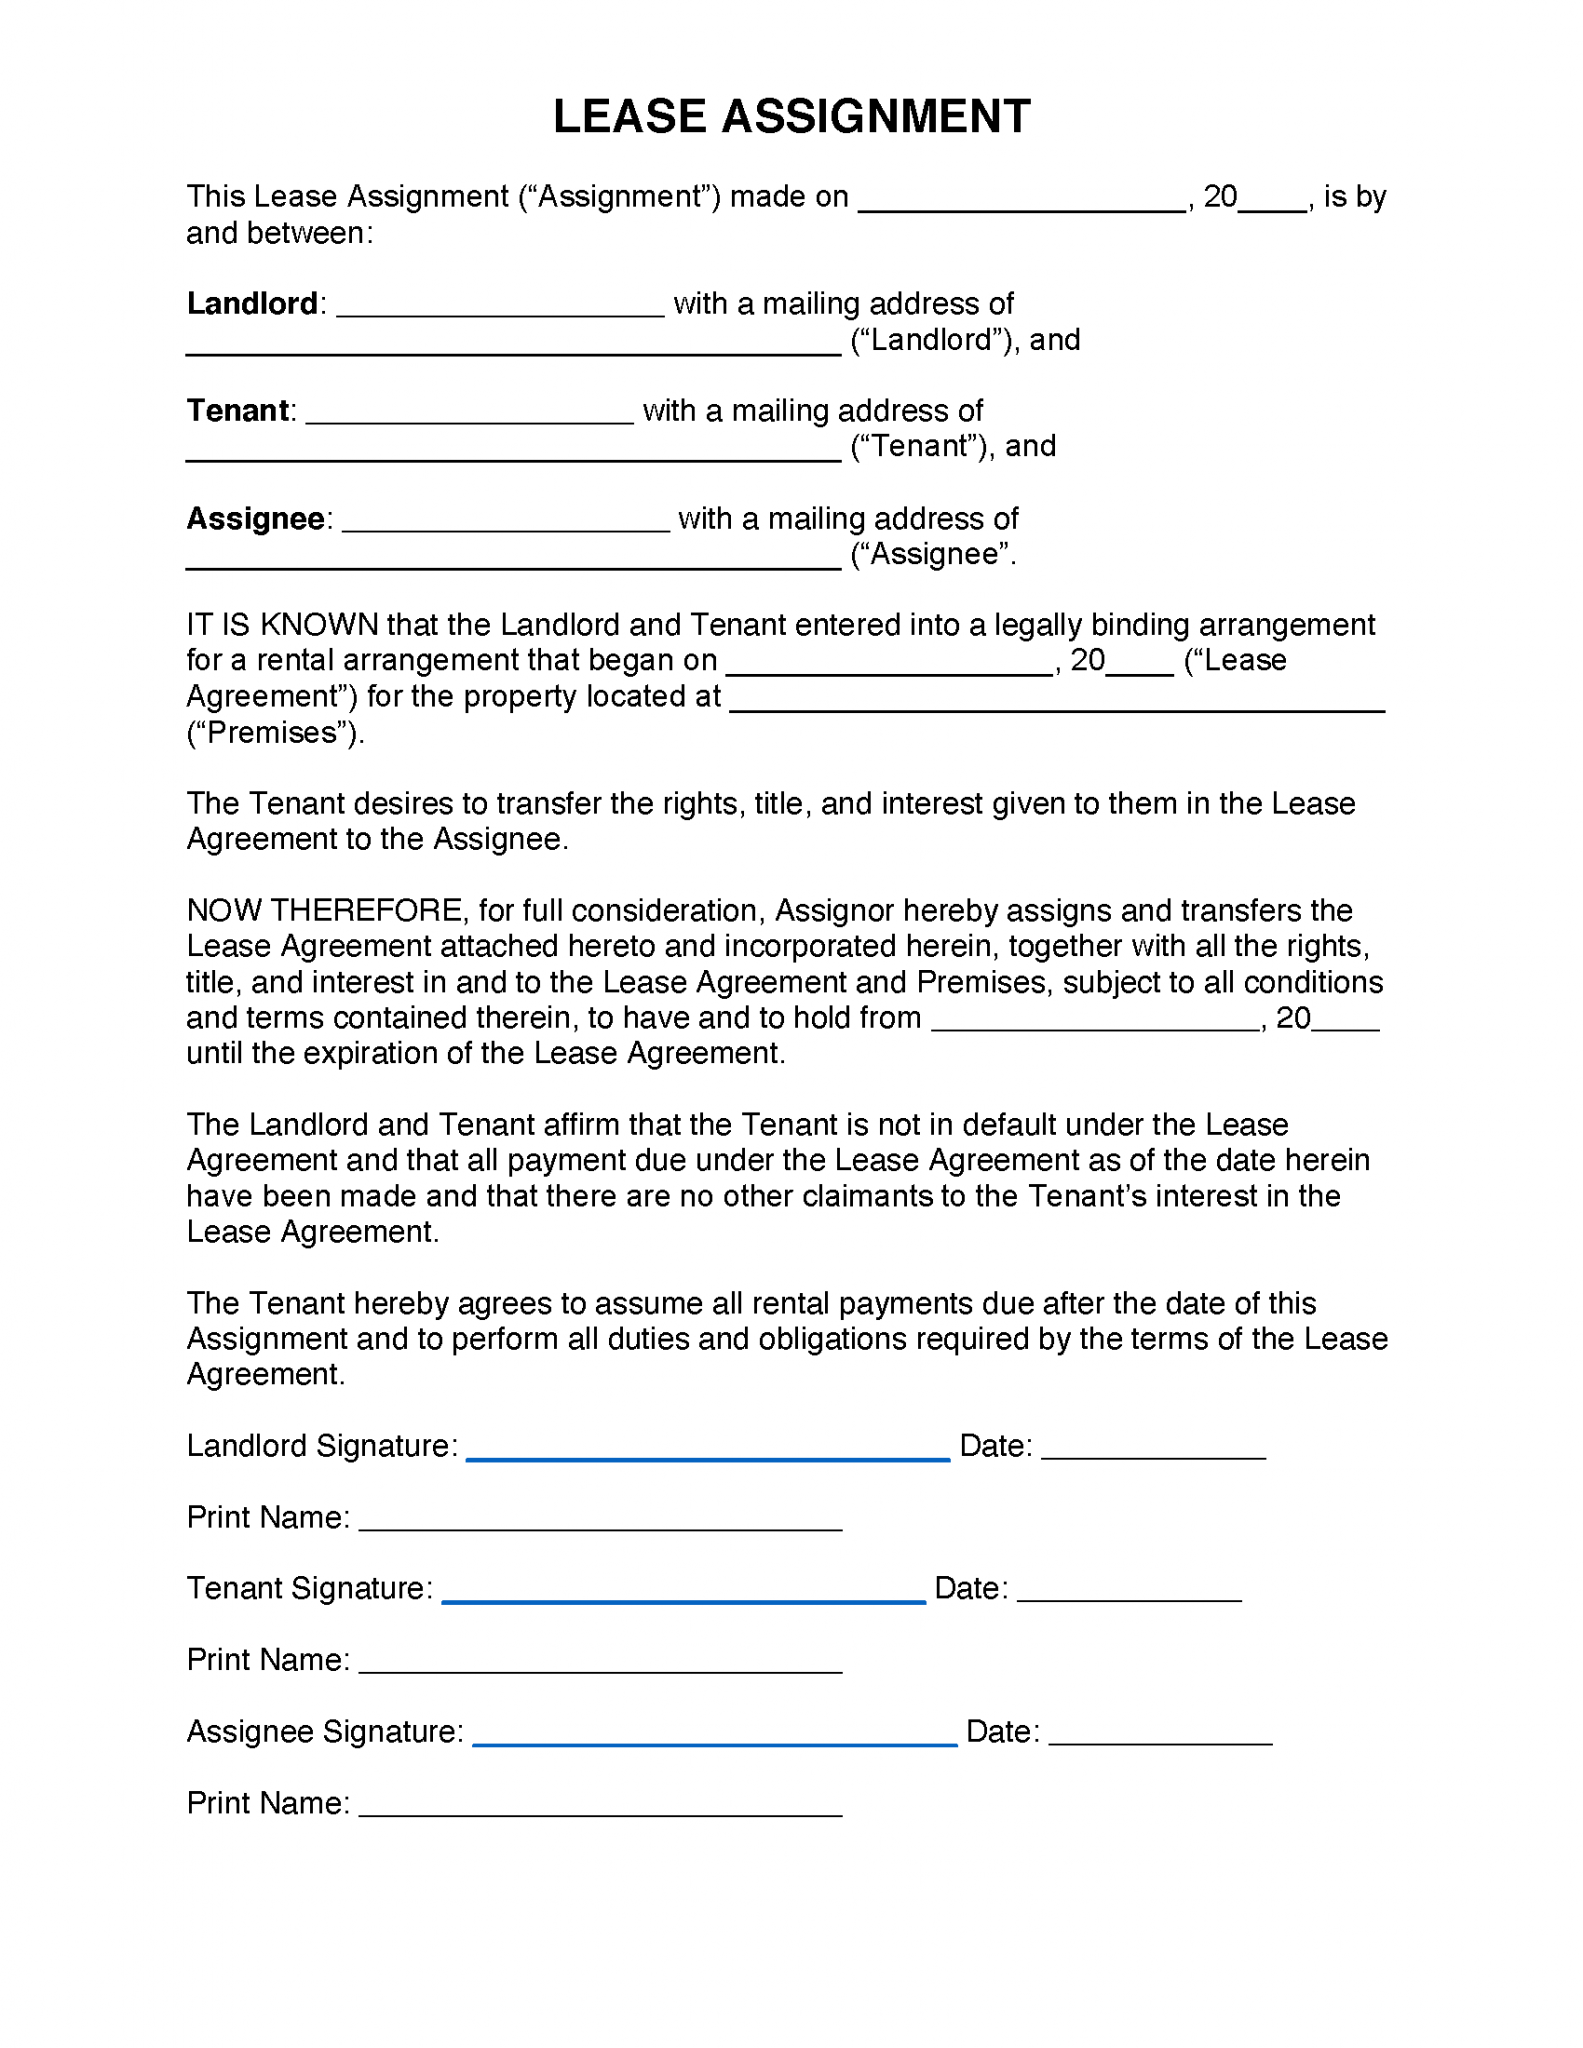 assignment to lease